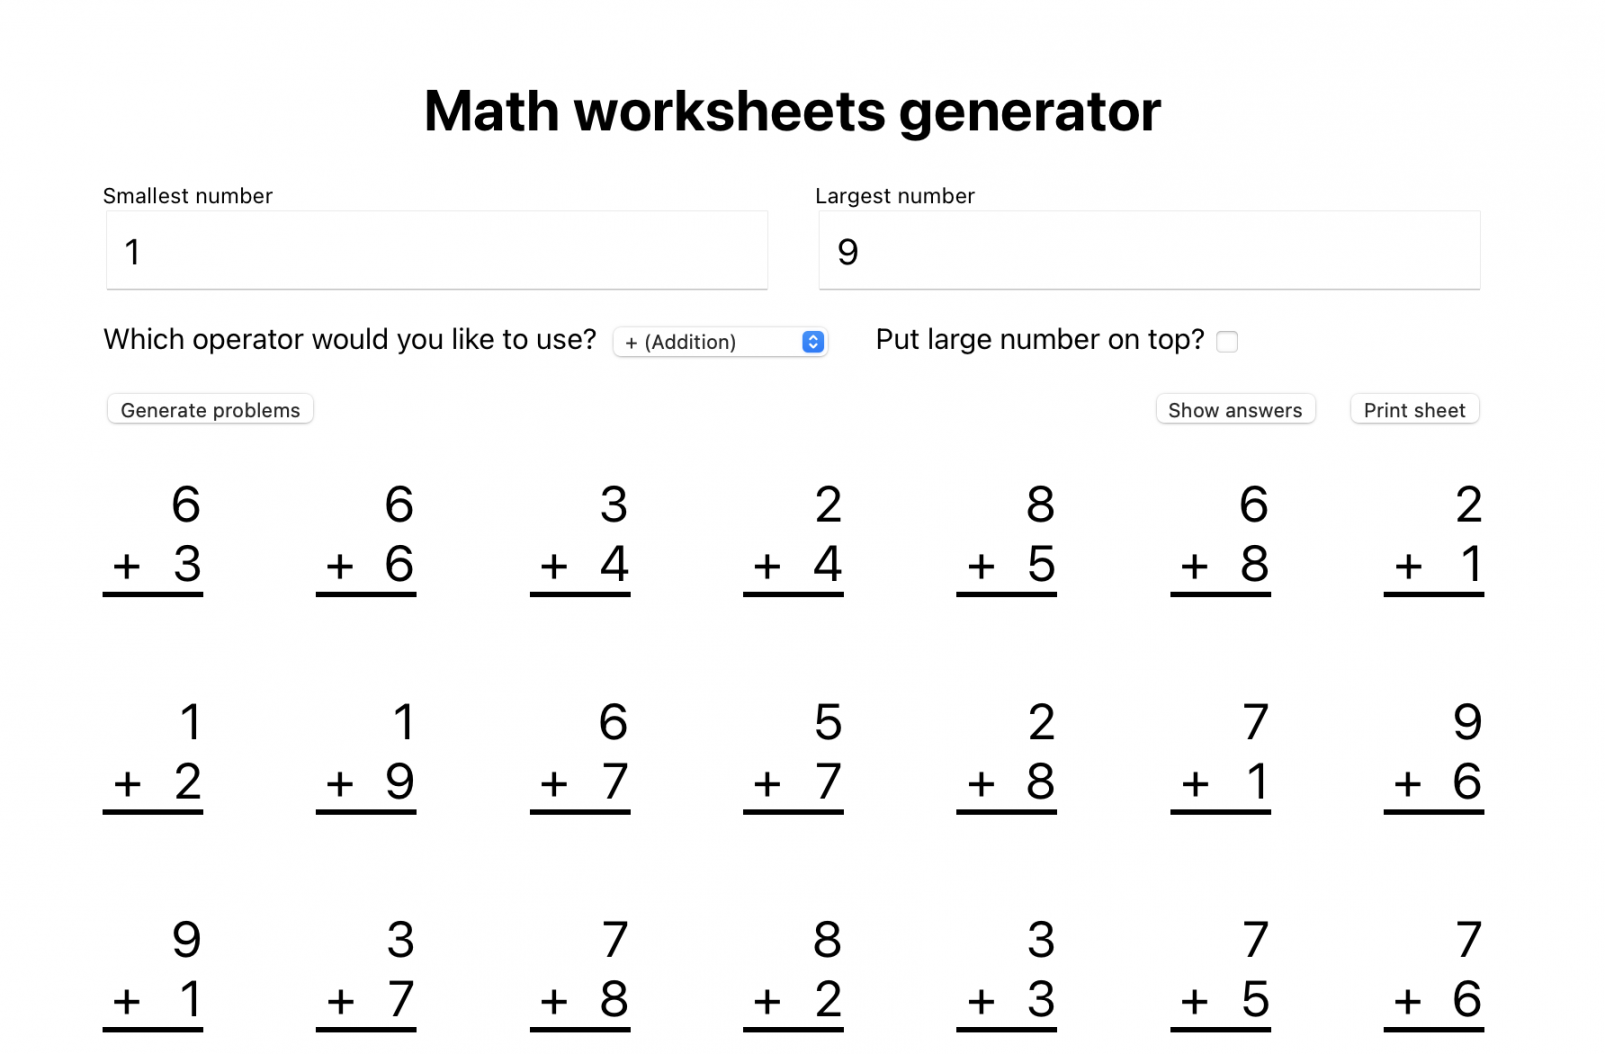 How I was extra as a parent and created a math worksheets